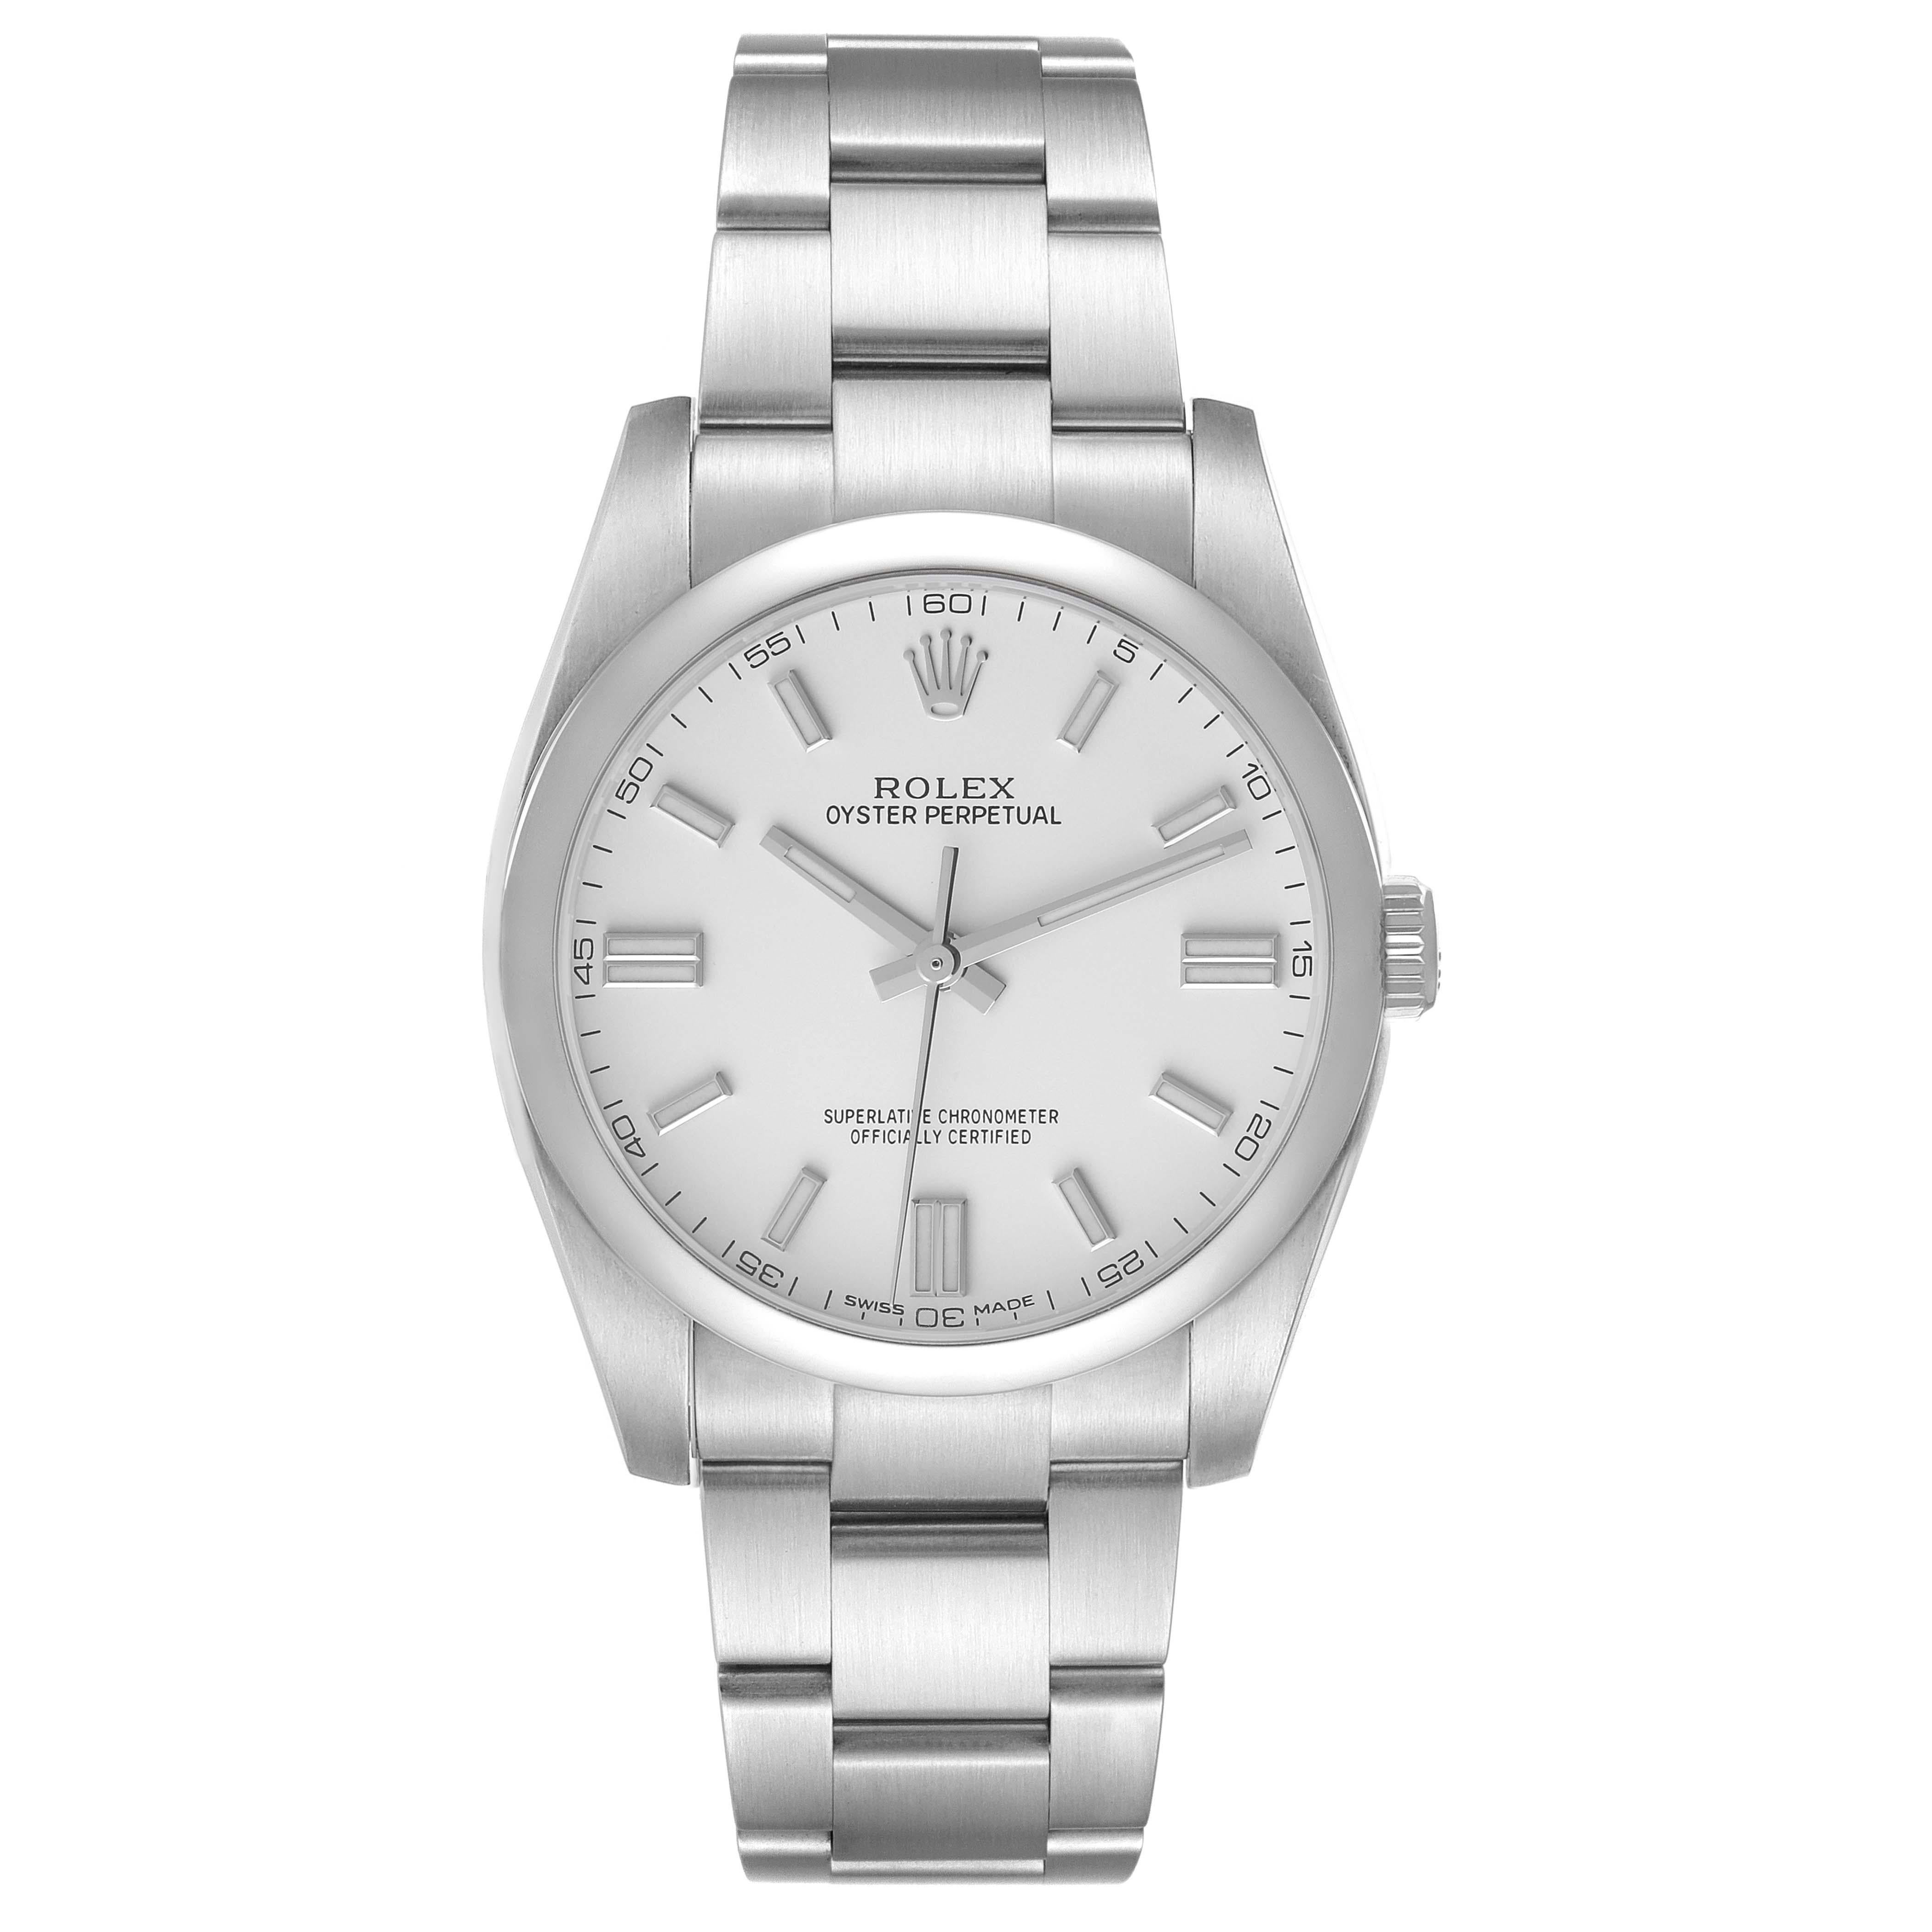 Rolex Oyster Perpetual 36 Silver Dial Steel Mens Watch 116000 Box Card. Officially certified chronometer self-winding movement. Stainless steel case 36.0 mm in diameter. Rolex logo on a crown. Stainless steel smooth domed bezel. Scratch resistant